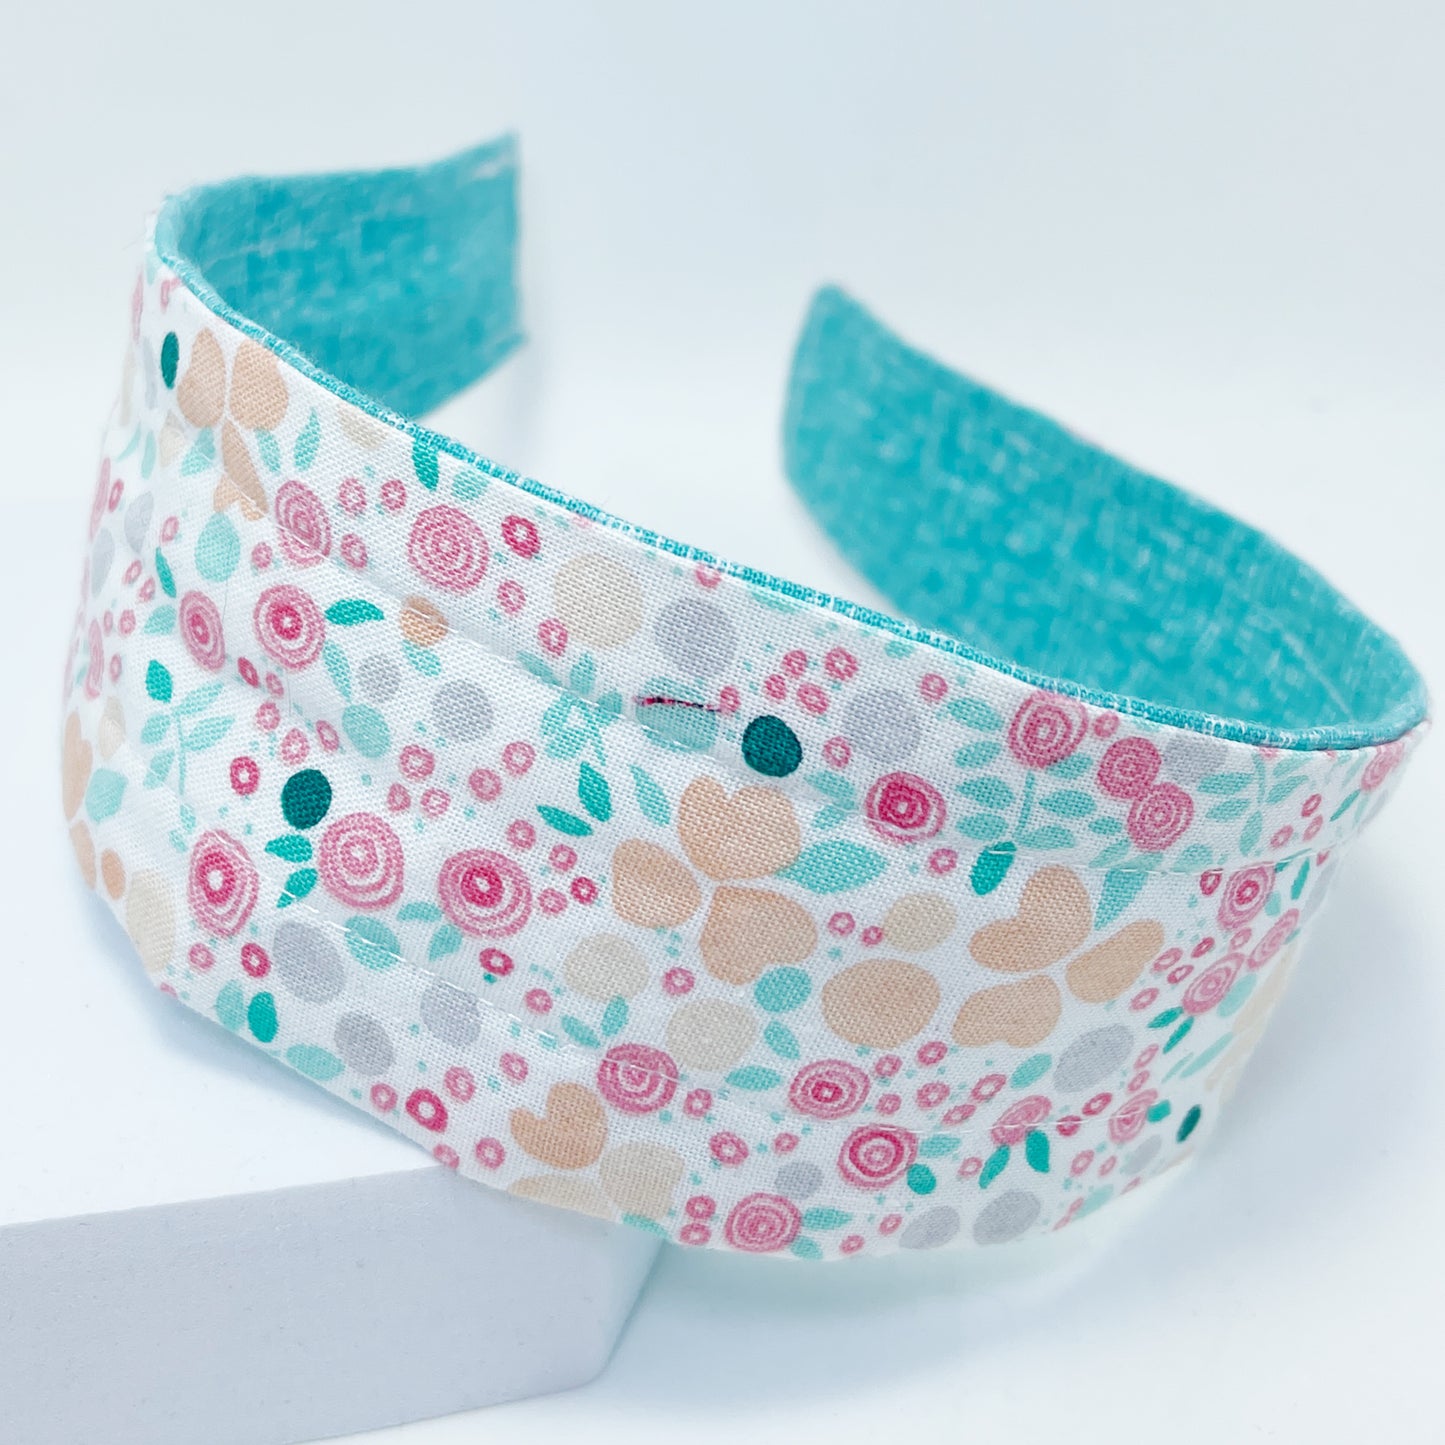 Comfortable Reversible Handmade Fabric Headband - Teal and Petite Pink floral